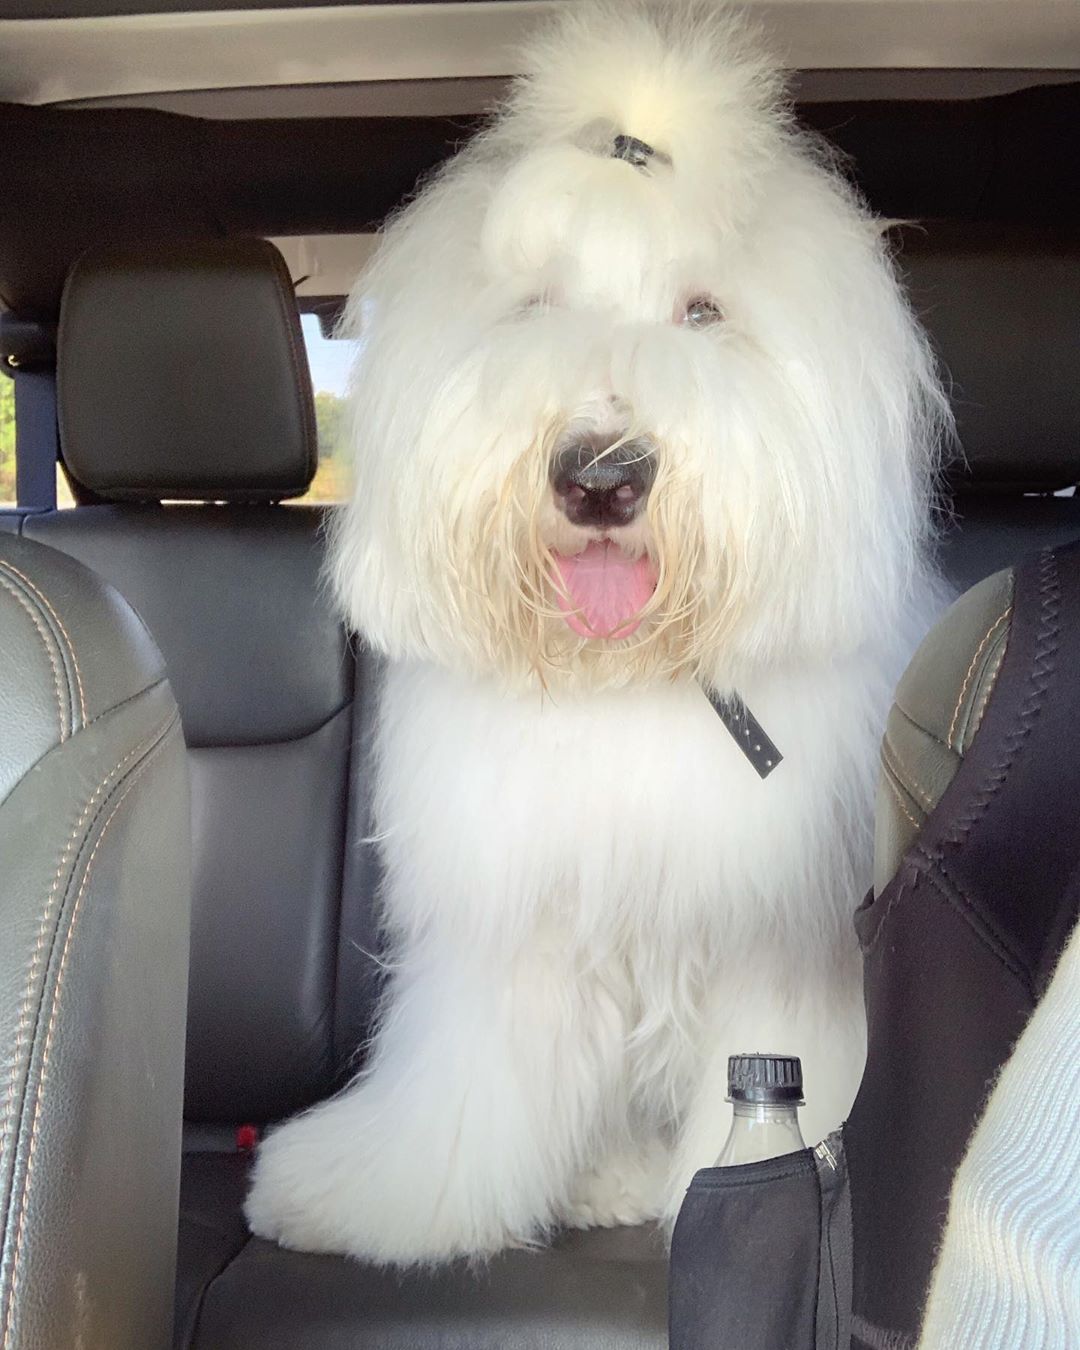 An Old English Sheepdog sitting in the backseat inside the car while sticking its tongue out